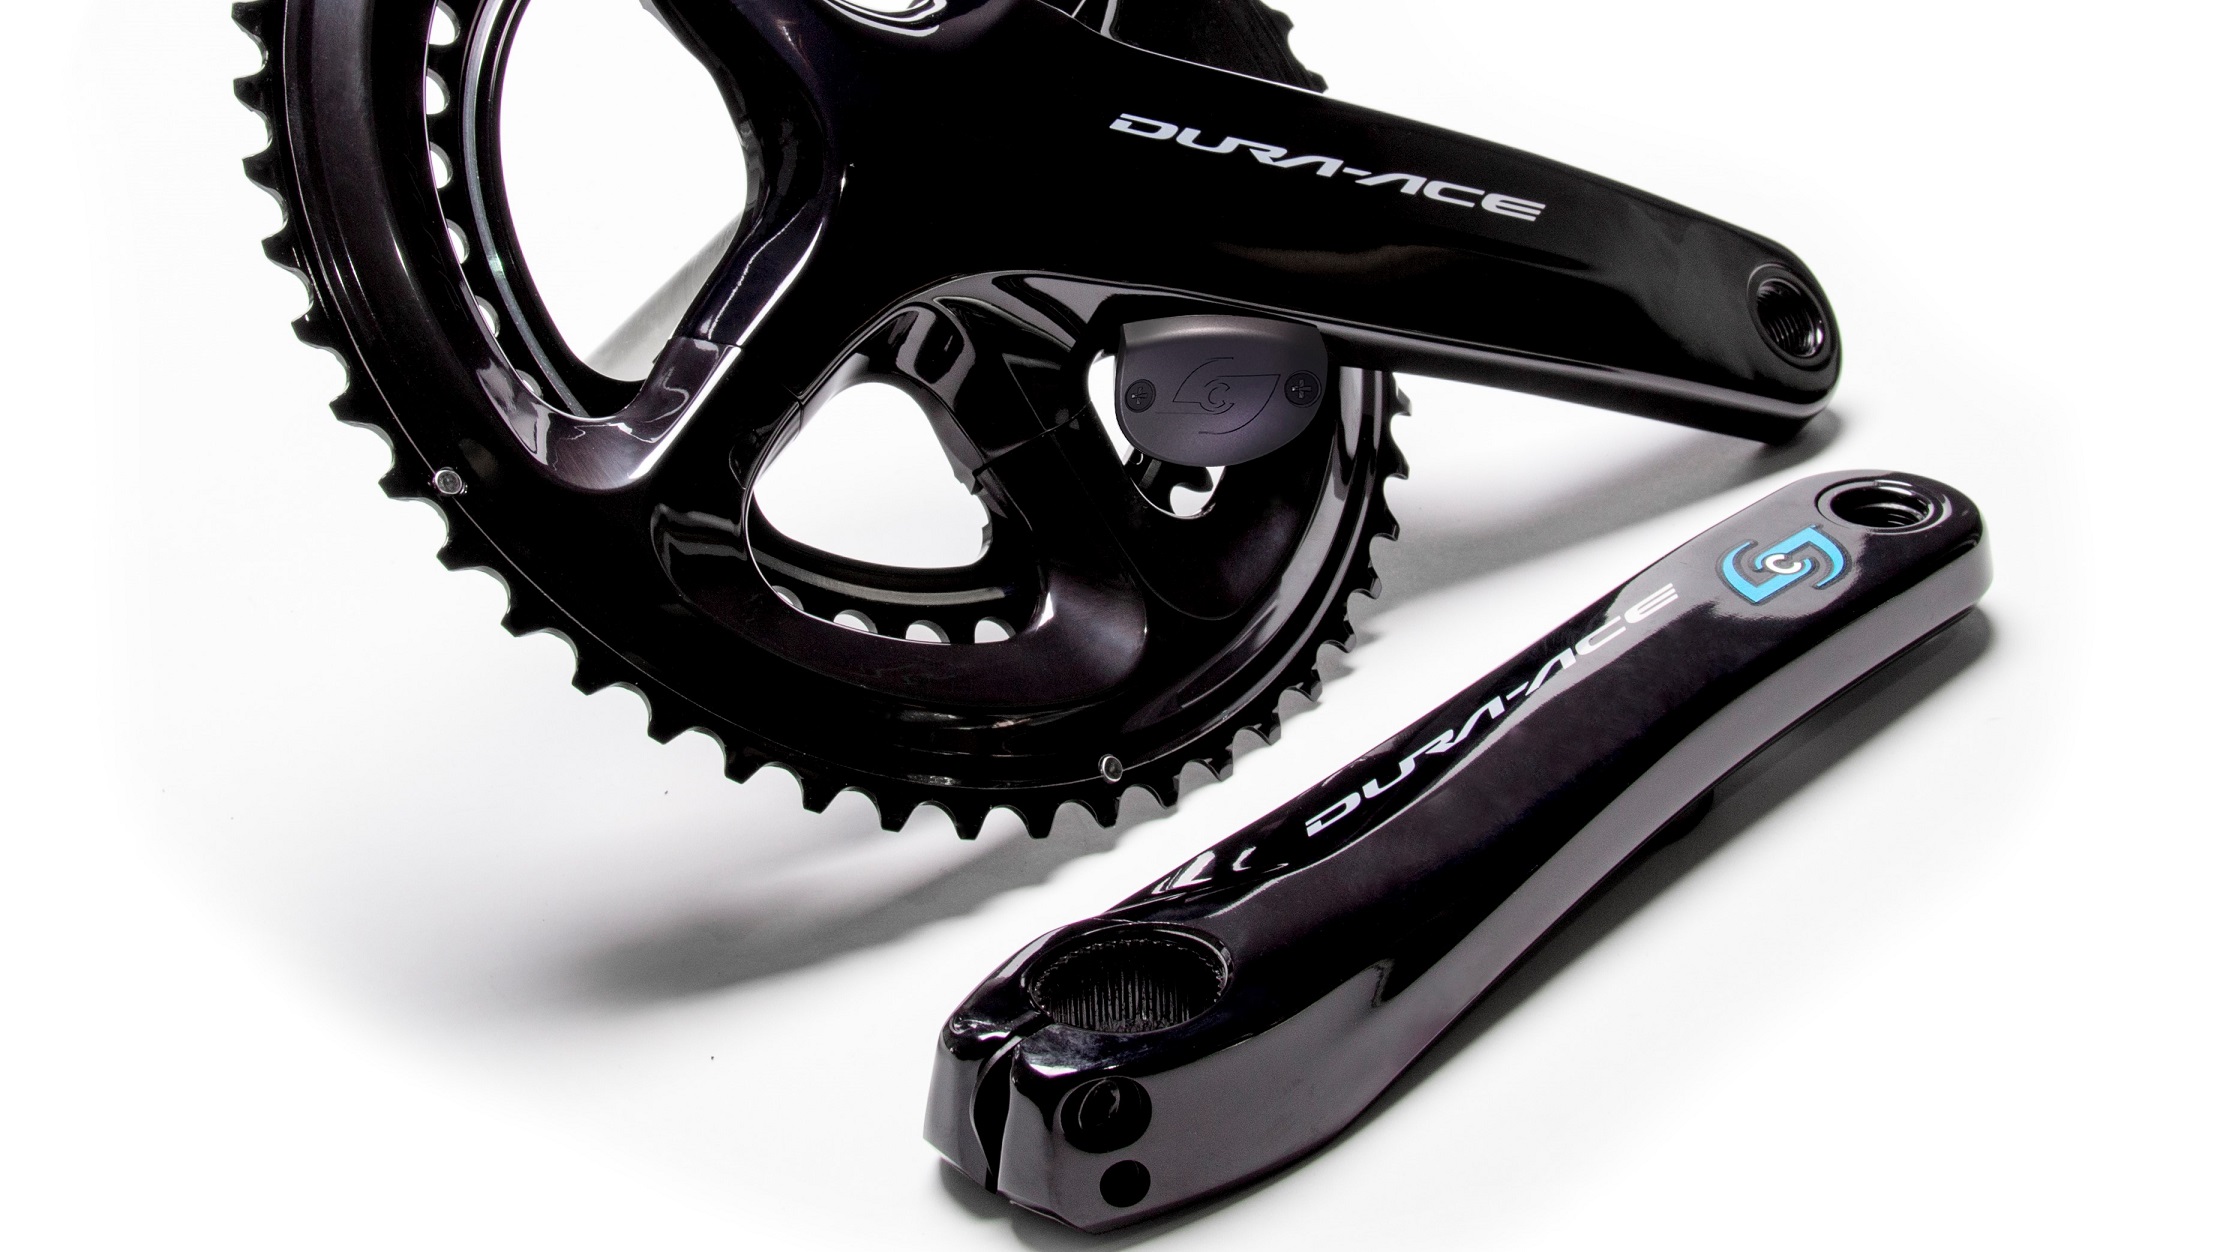 stages shimano 105 r7000